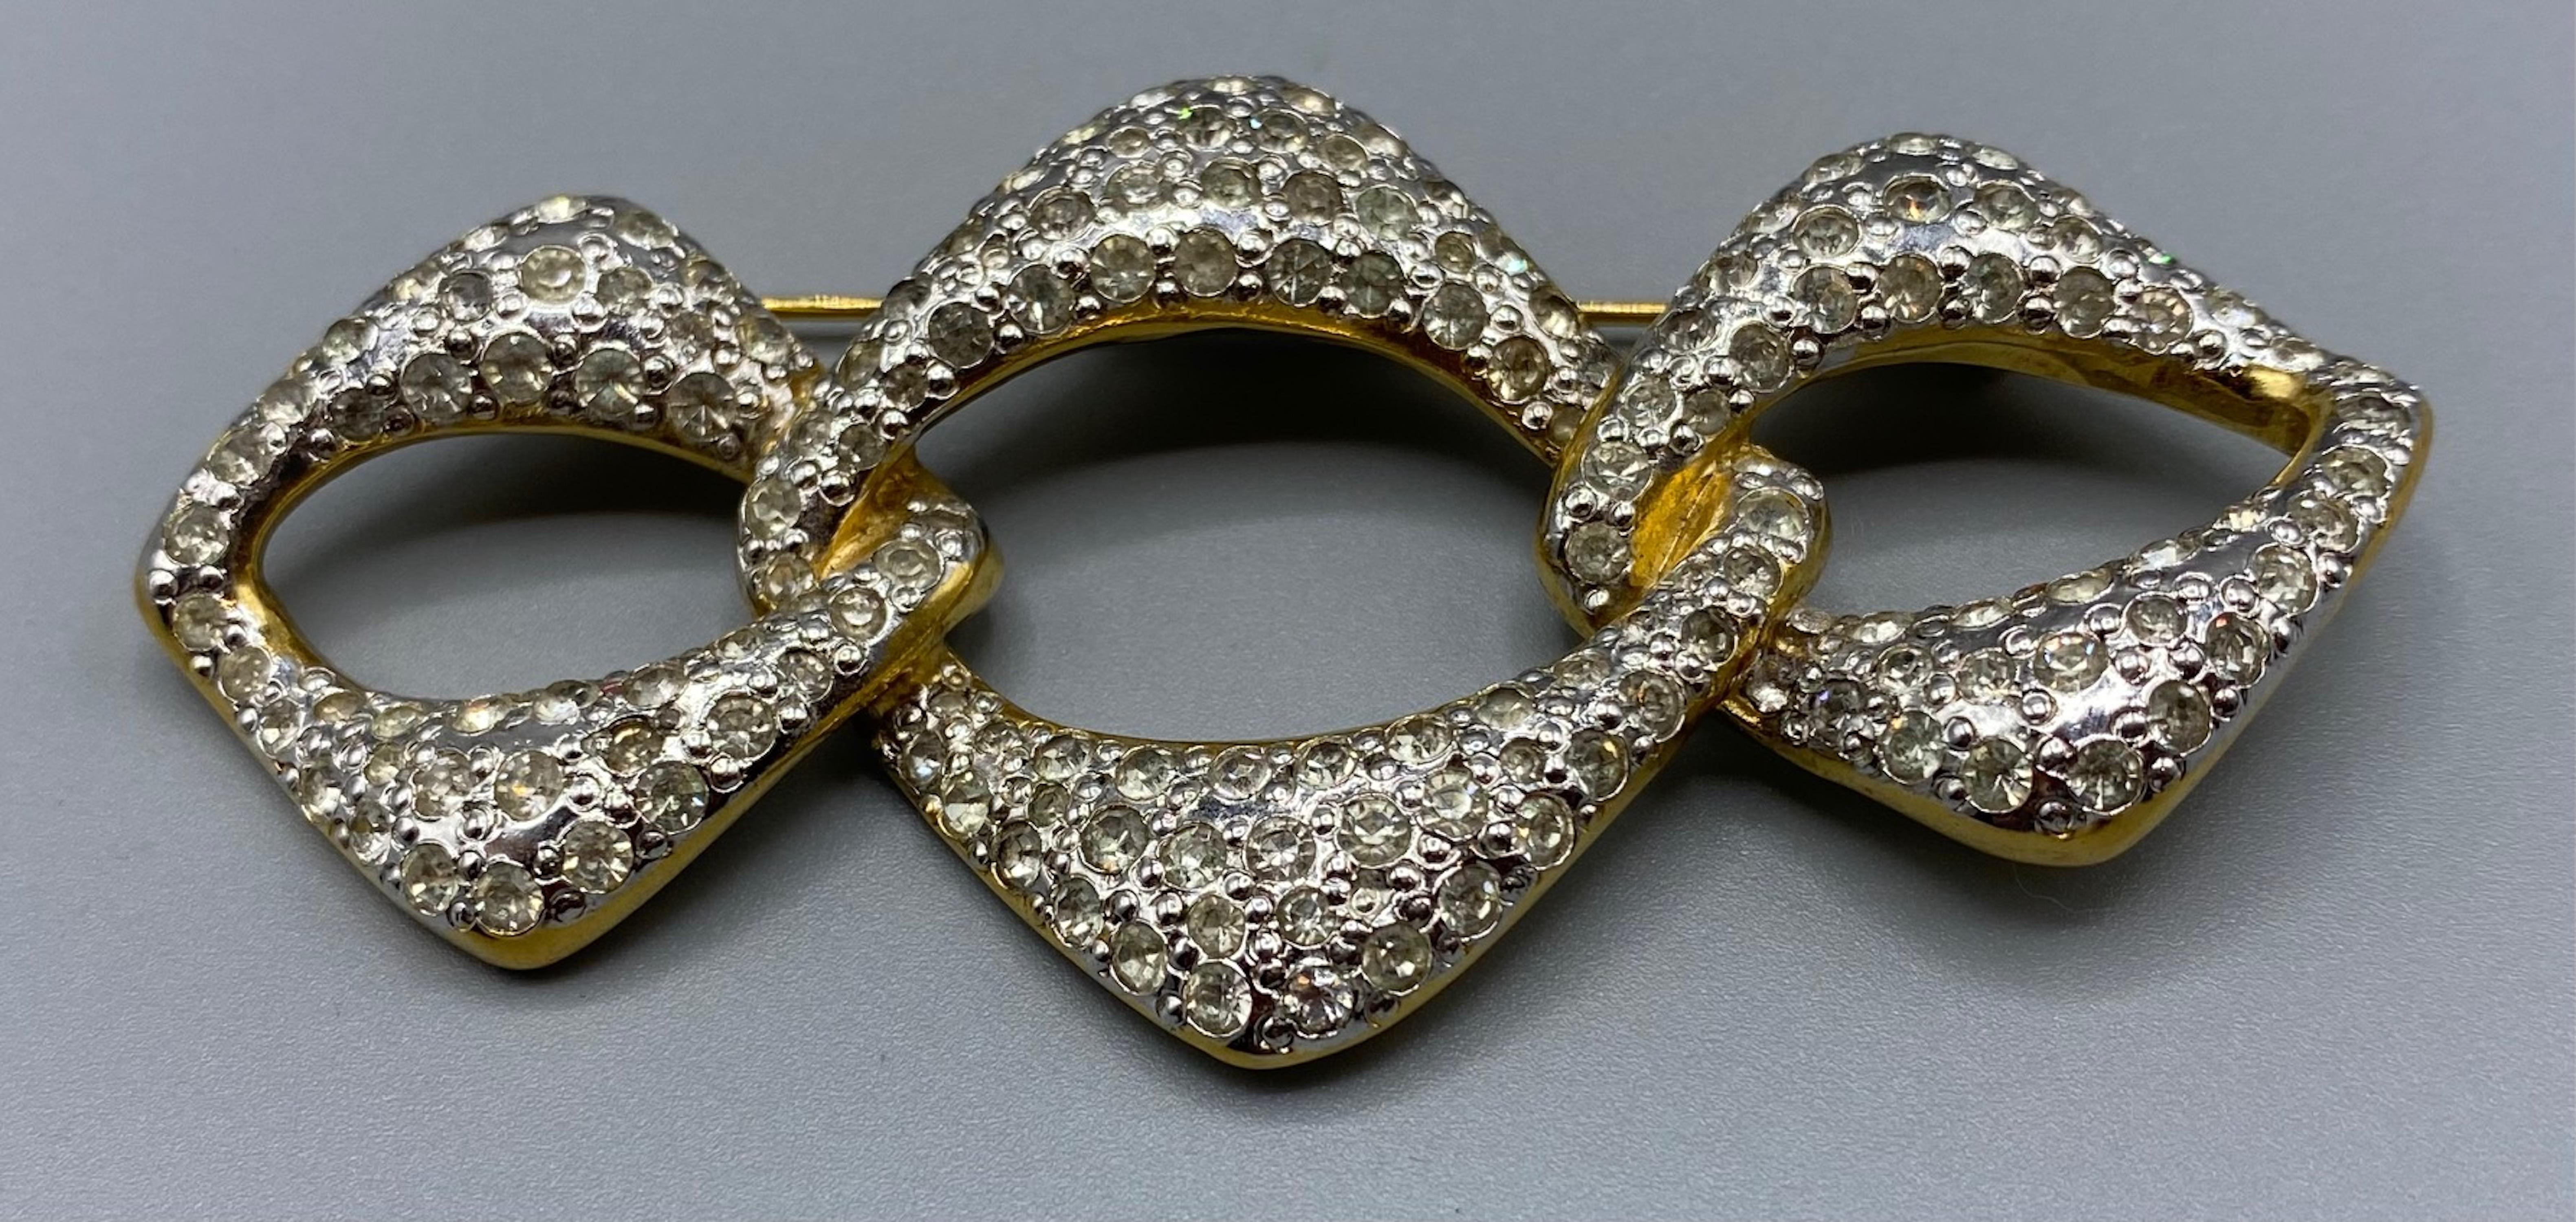 Presented is a classic link design brooch designed by Robert Goosens for Yves Saint Laurent of Paris. It is gold and rhodium plated with hand set pave' rhinestones. The brooch measures 3.5 inches wide and 2 inches tall. On the back is a rectangular